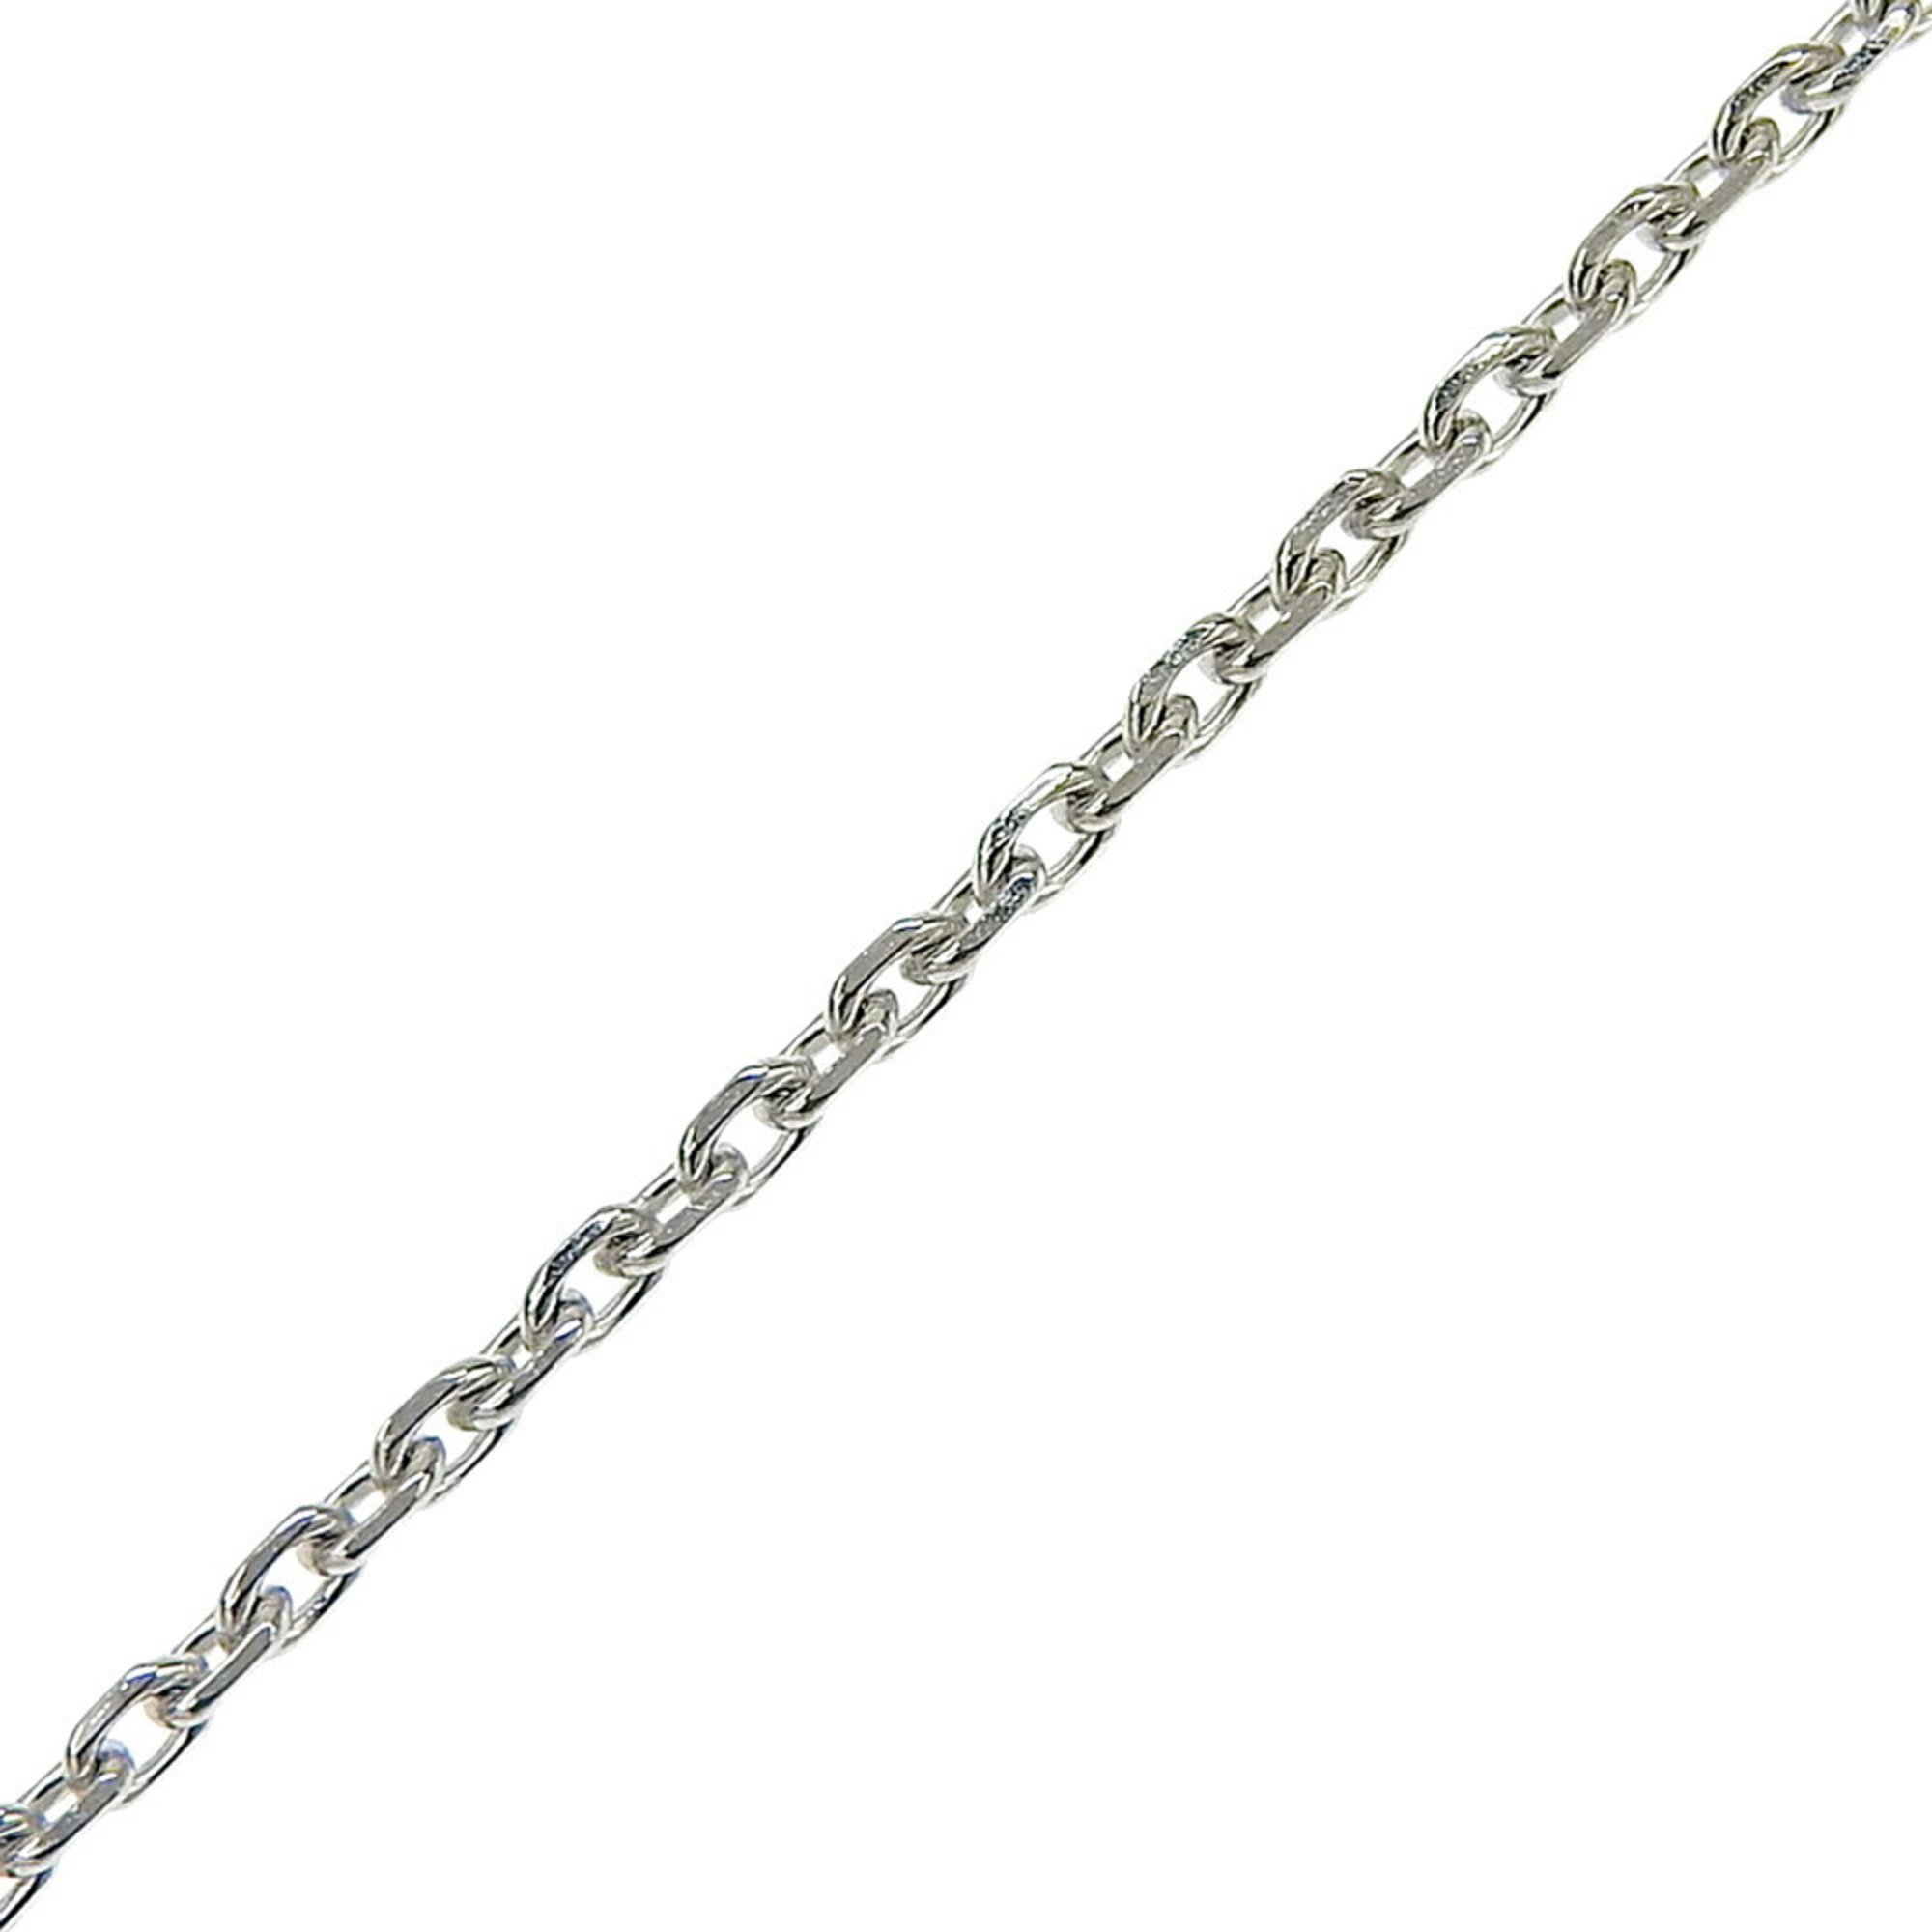 Van Cleef & Arpels Alhambra Necklace 2020 Holiday K18 White Gold x Diamond 8.5g Women's A+ Rank I120124030